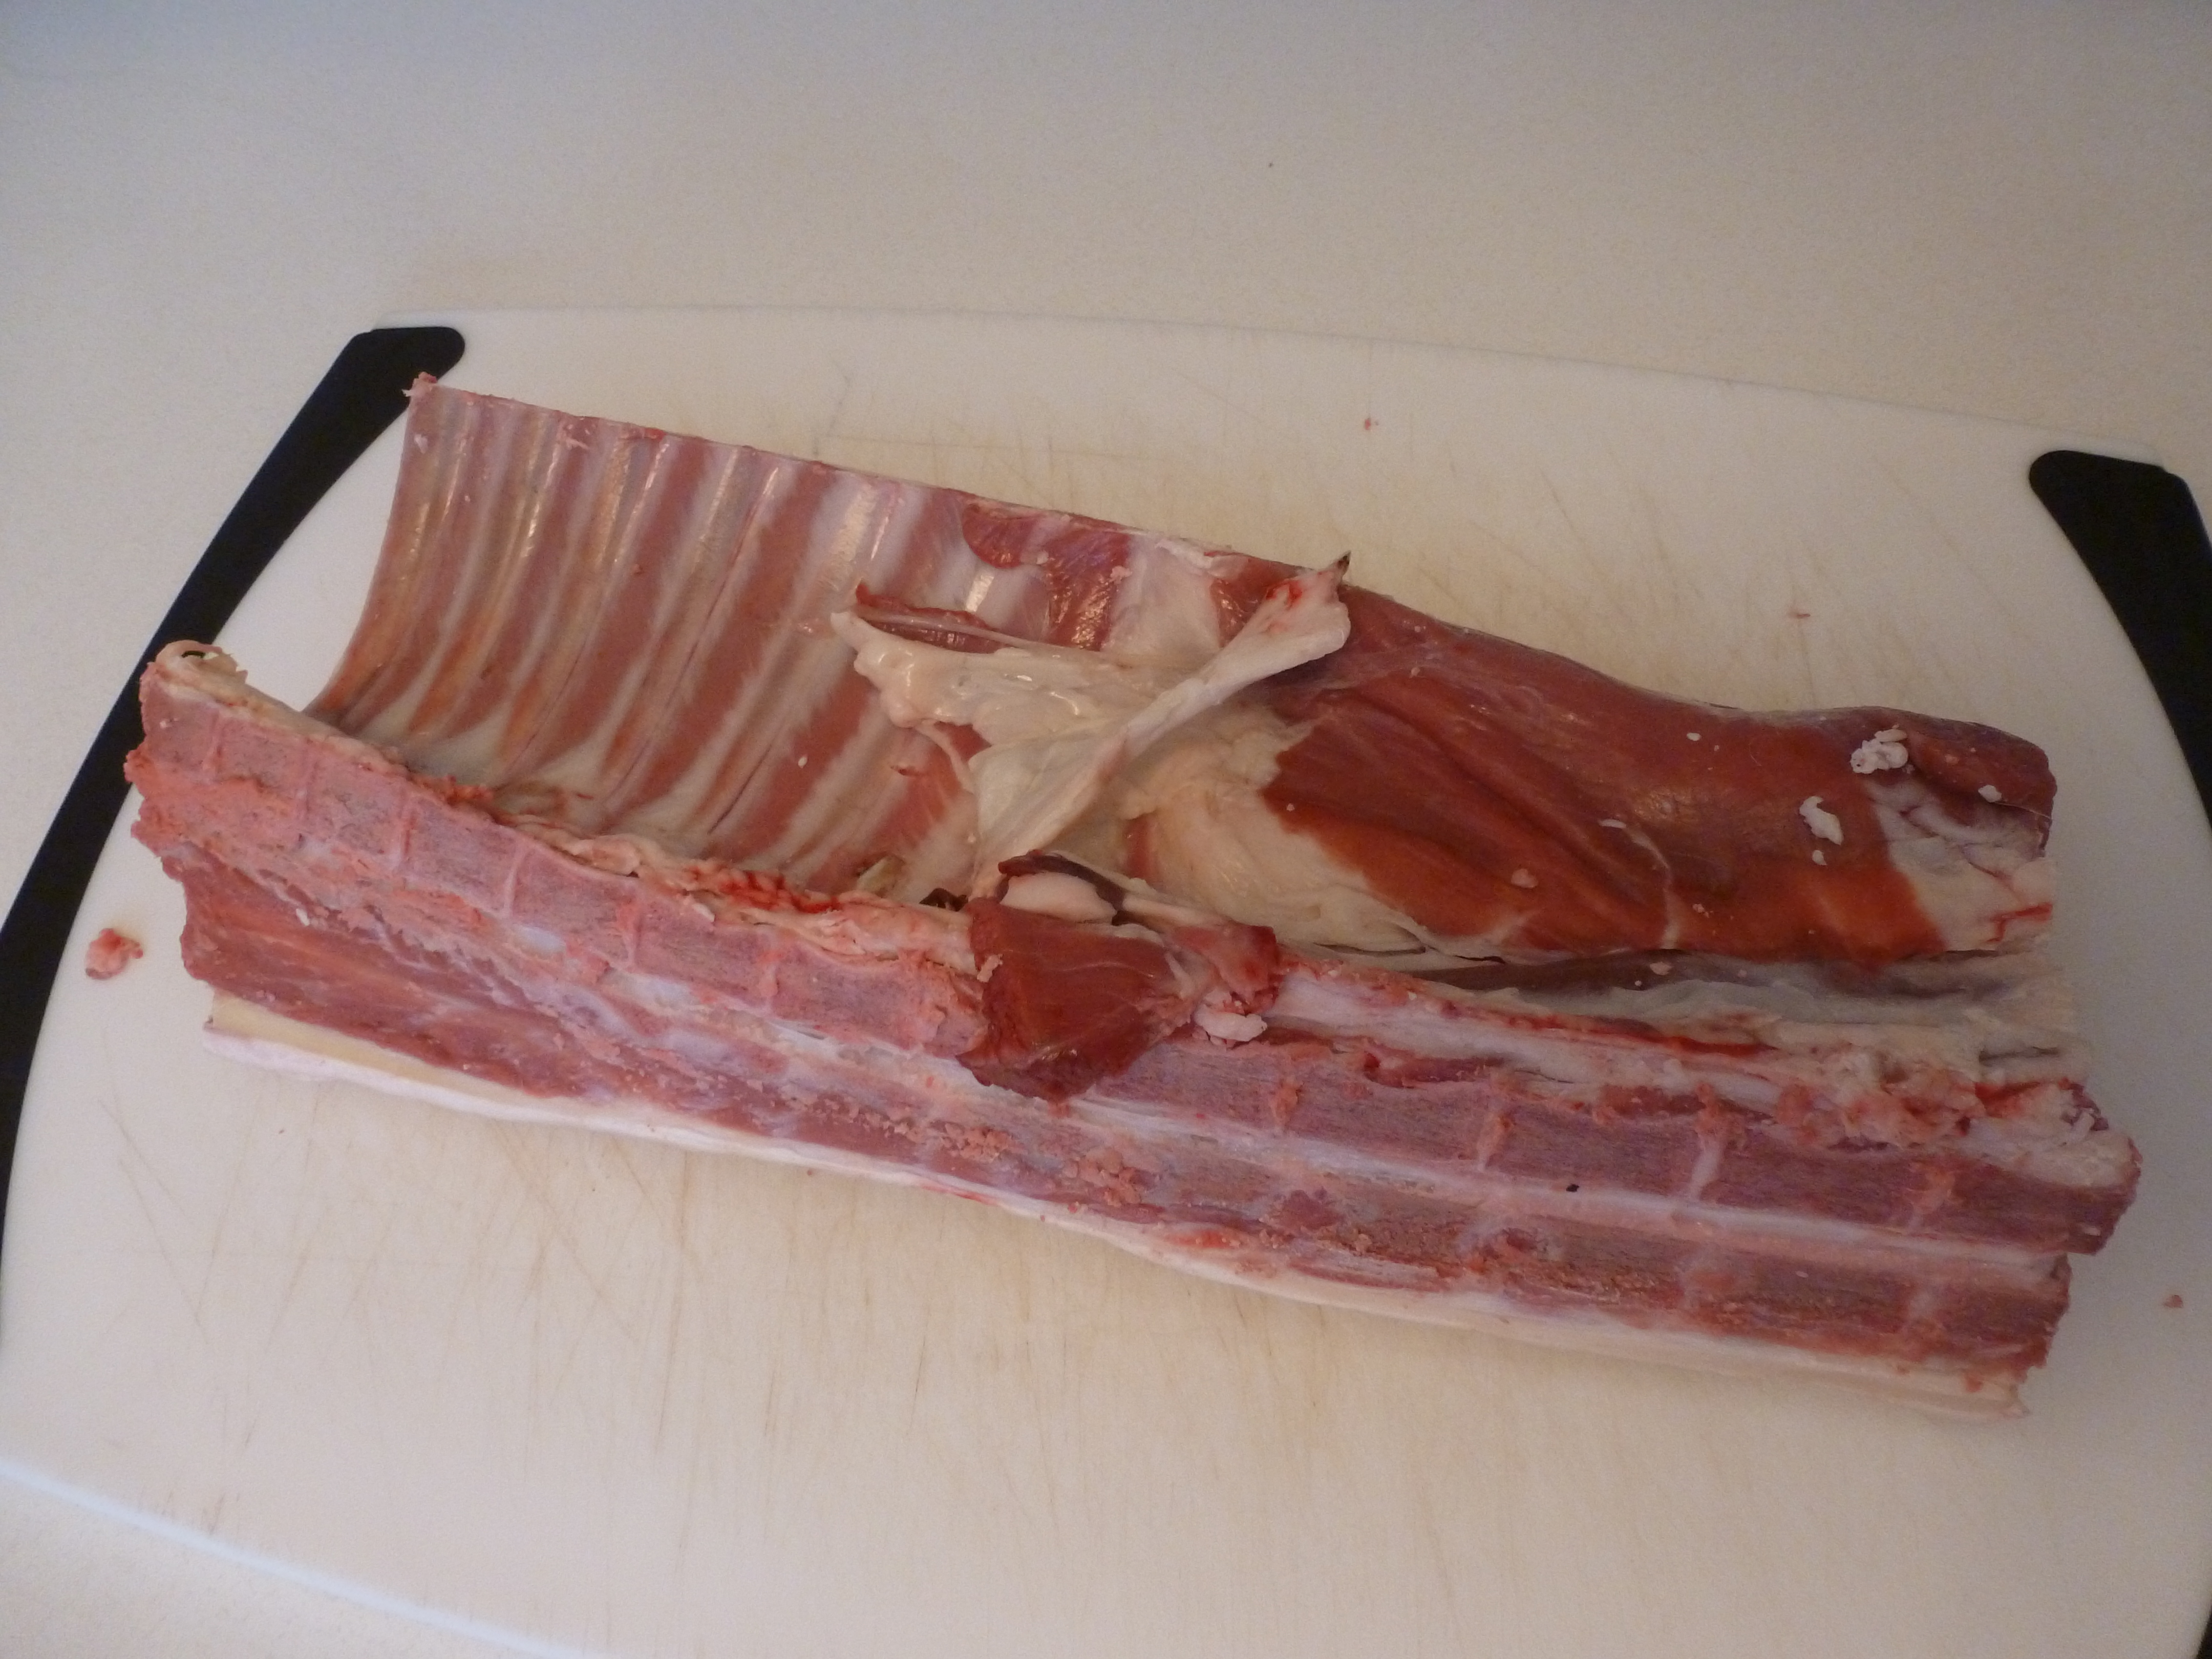 The underside of the whole lamb loin